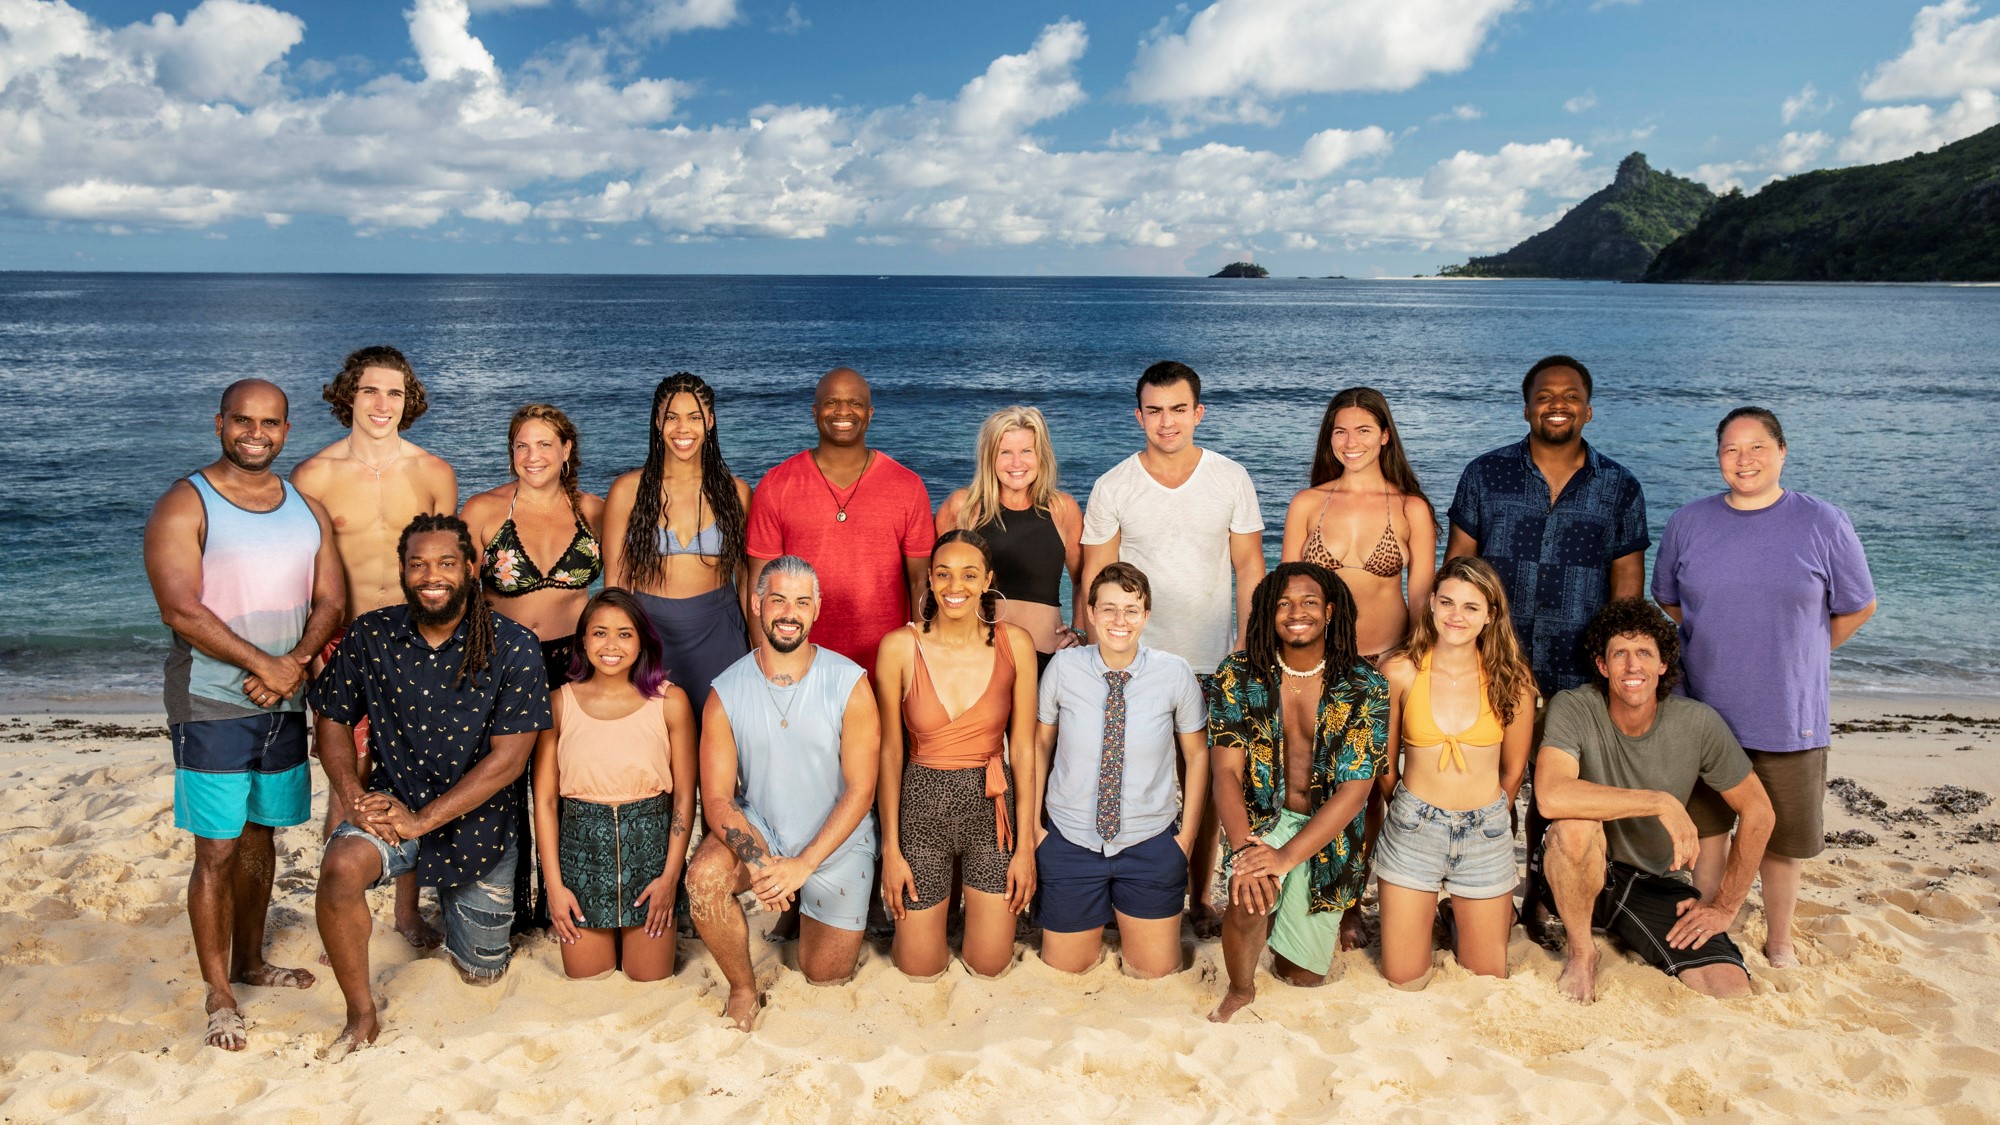 How to watch Survivor 41 online and stream new episodes from anywhere